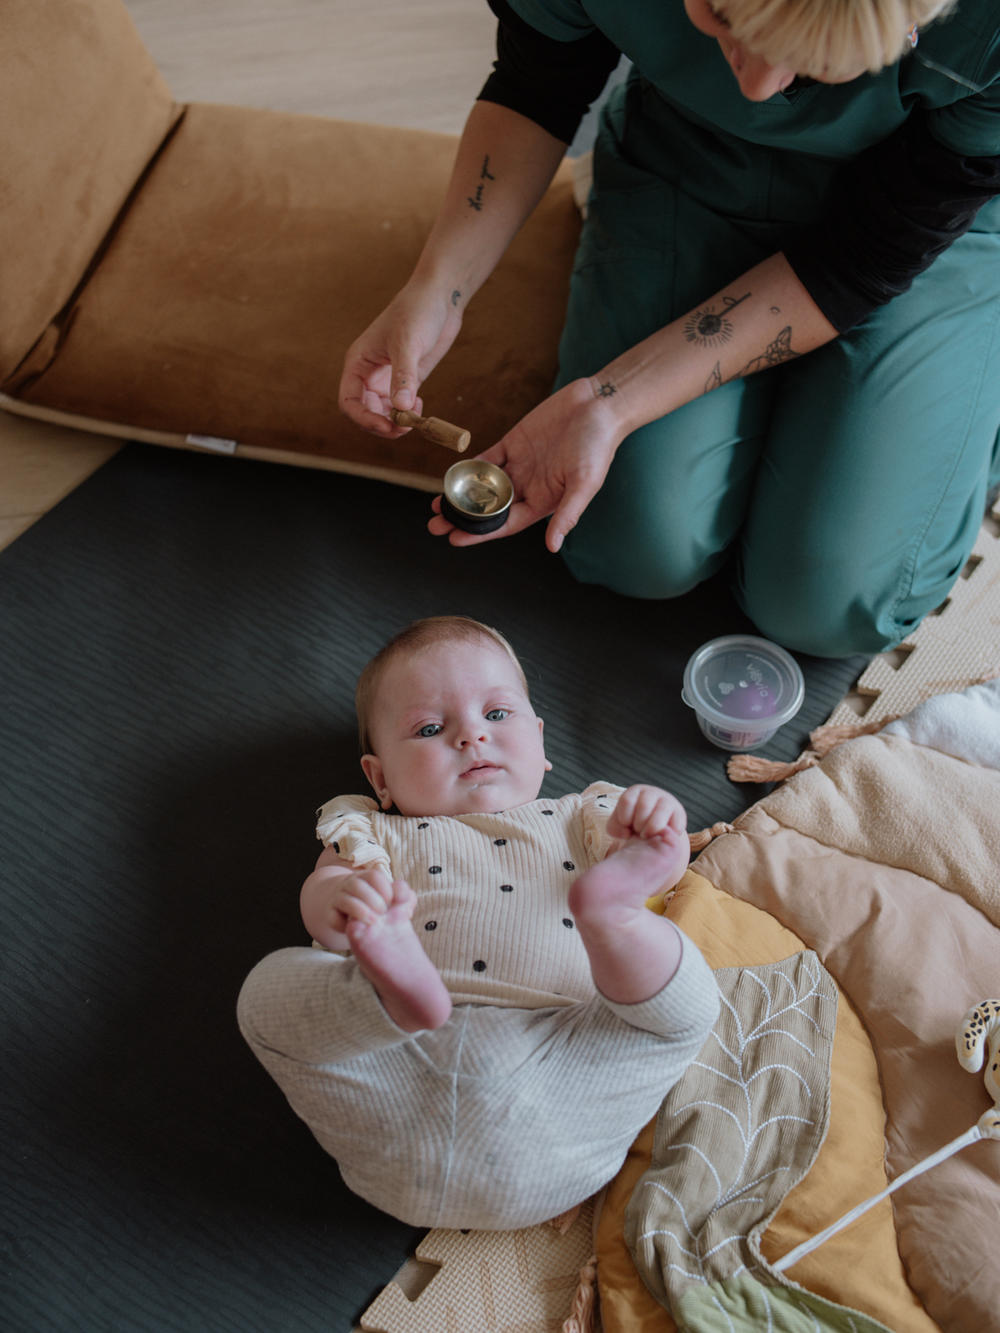 June Kelly, a certified postpartum doula and yoga teacher, uses a sound bowl to activate a baby's senses.